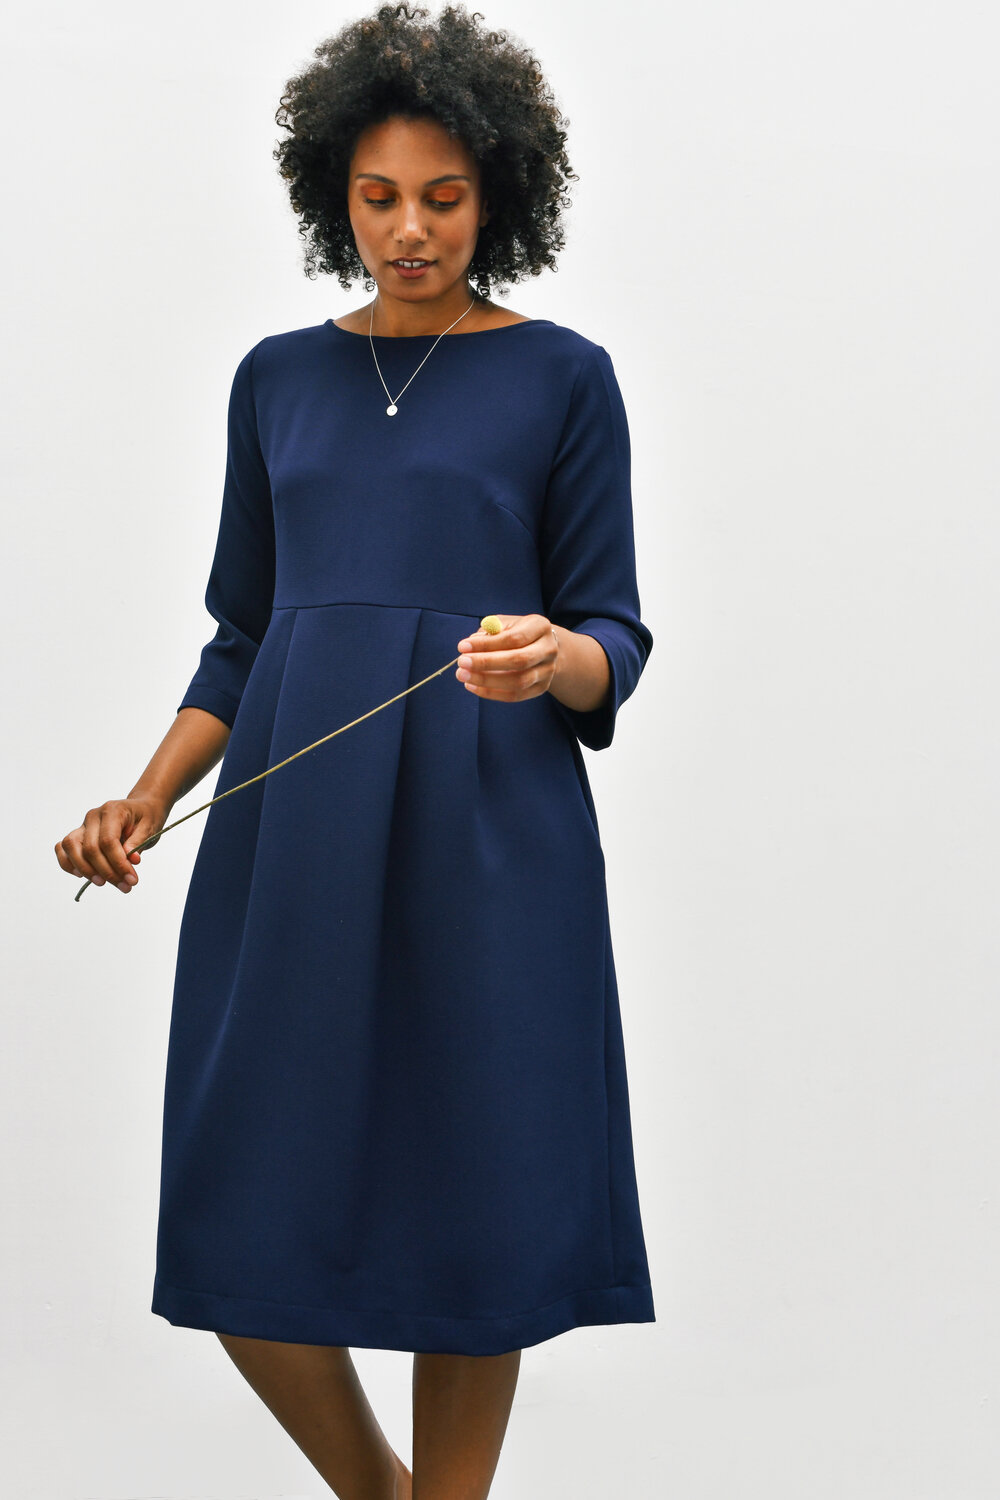 Woman wearing the Cissy Dress sewing pattern by Homer and Howells. A dress pattern made in cottons, cords, wool or crepe fabrics, featuring a slightly boxy fit, boat neck, bracelet length sleeves, centre back zip. Deep pleats in the skirt create volume and movement, plus side seam pockets.